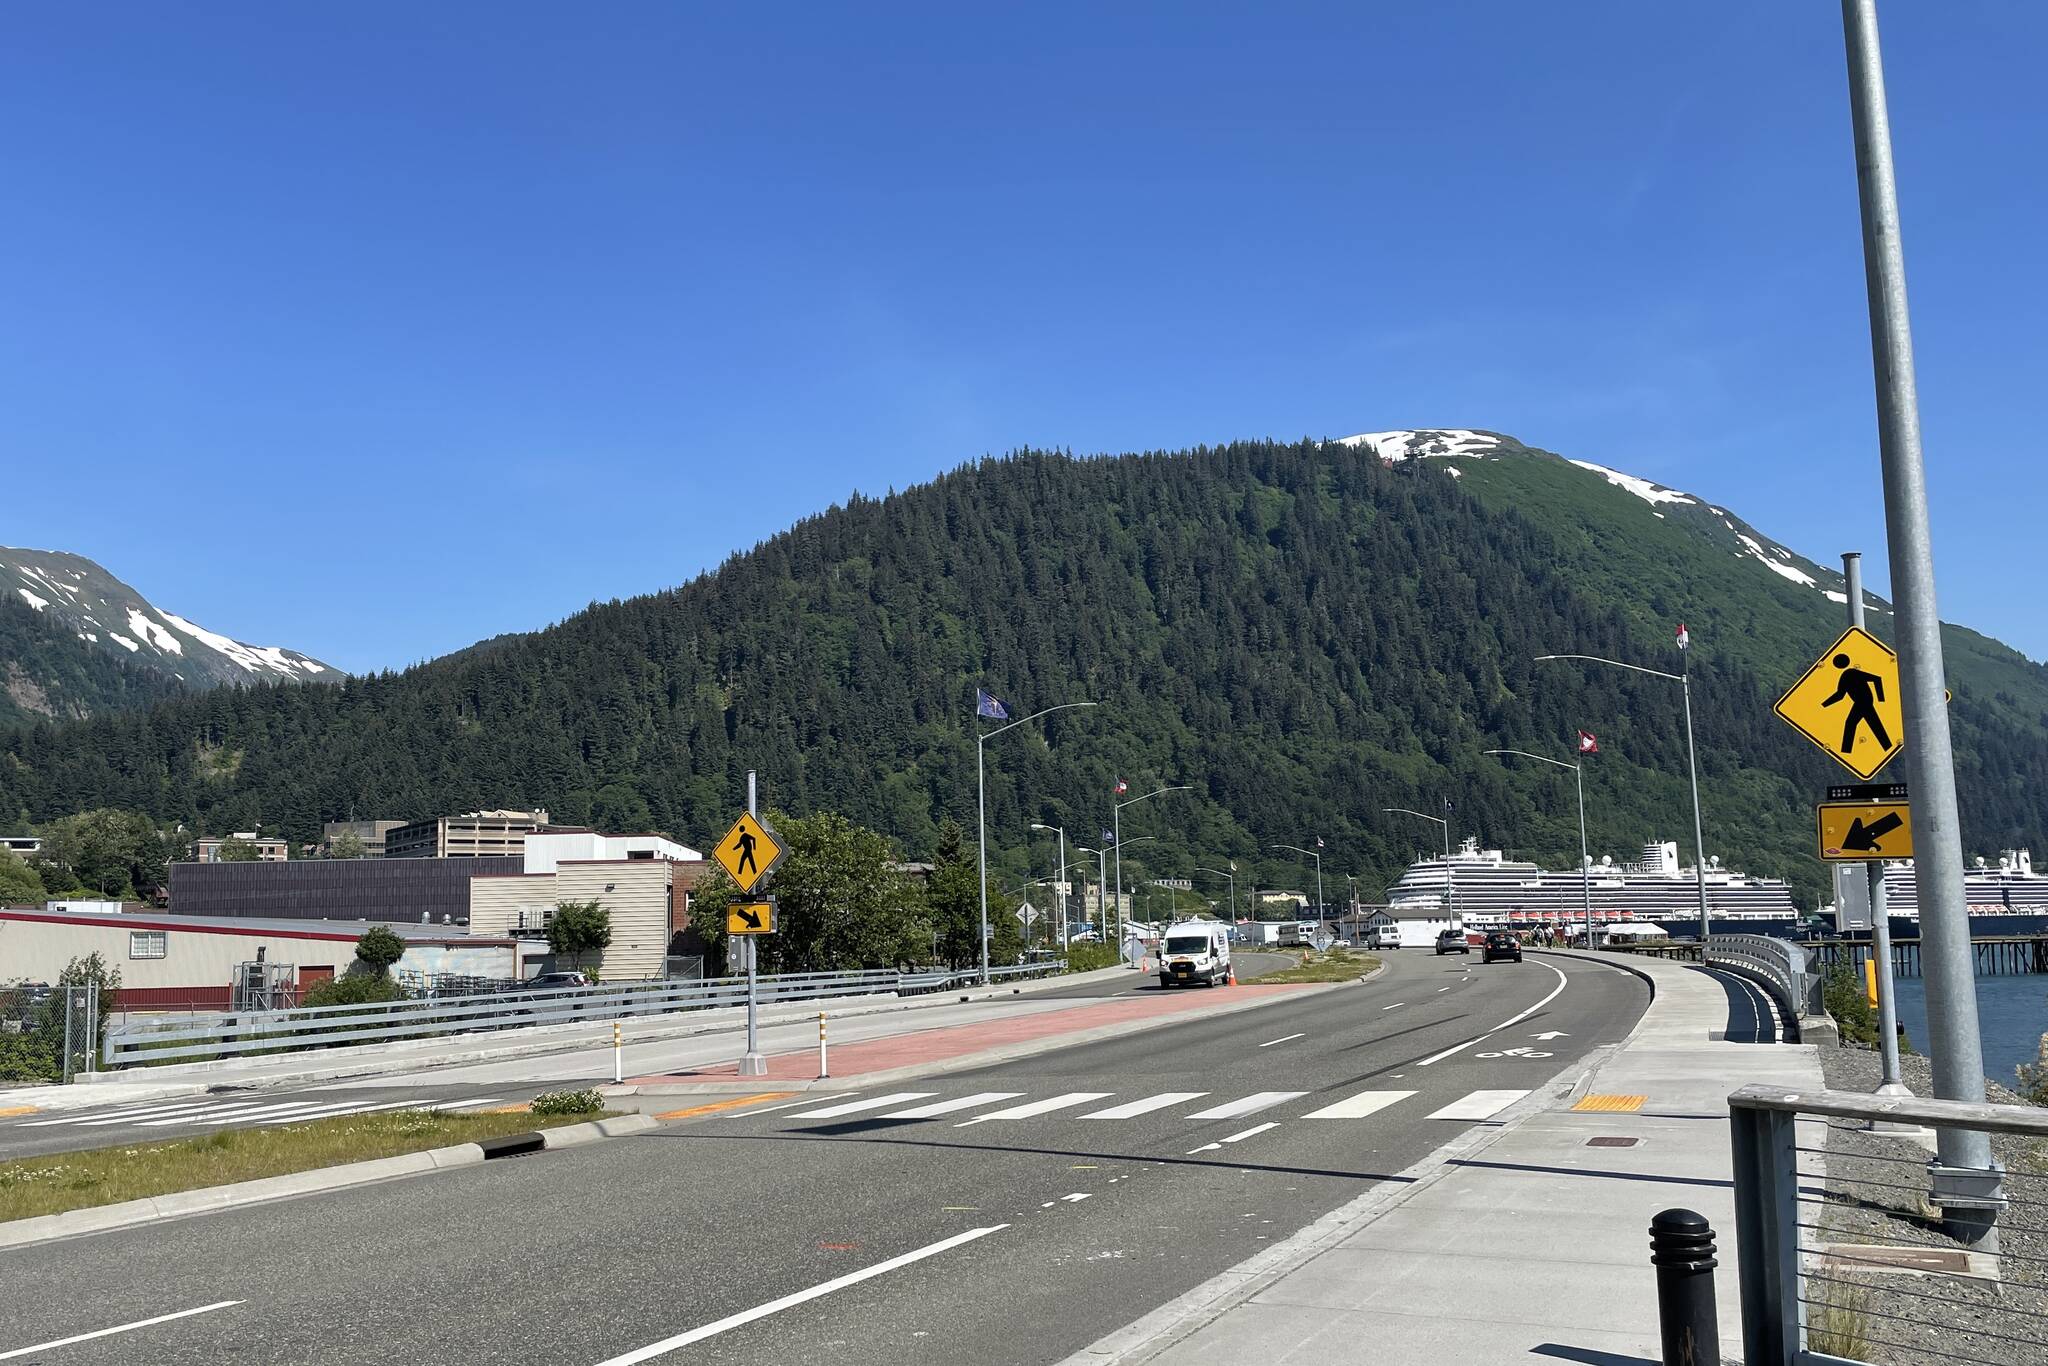 A 13-year-old girl was medevaced after being struck by a vehicle near the crosswalk across Egan Drive by Gold Creek on June 27, 2022. (Michael S. Lockett / Juneau Empire file)